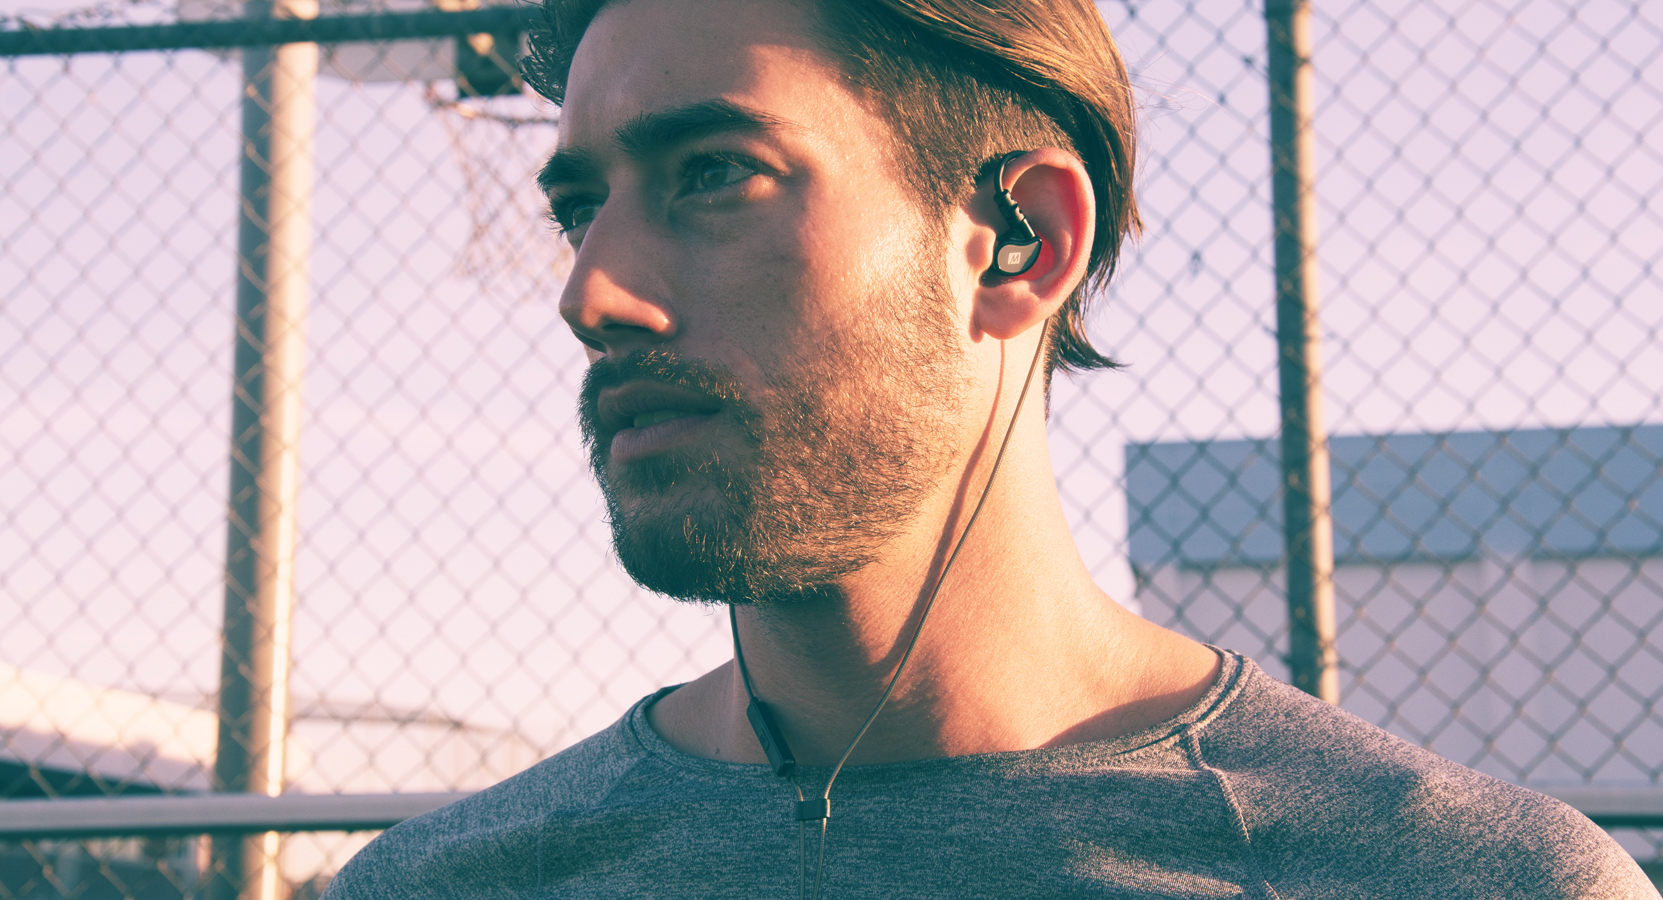 SECURE OVER-THE-EAR FIT